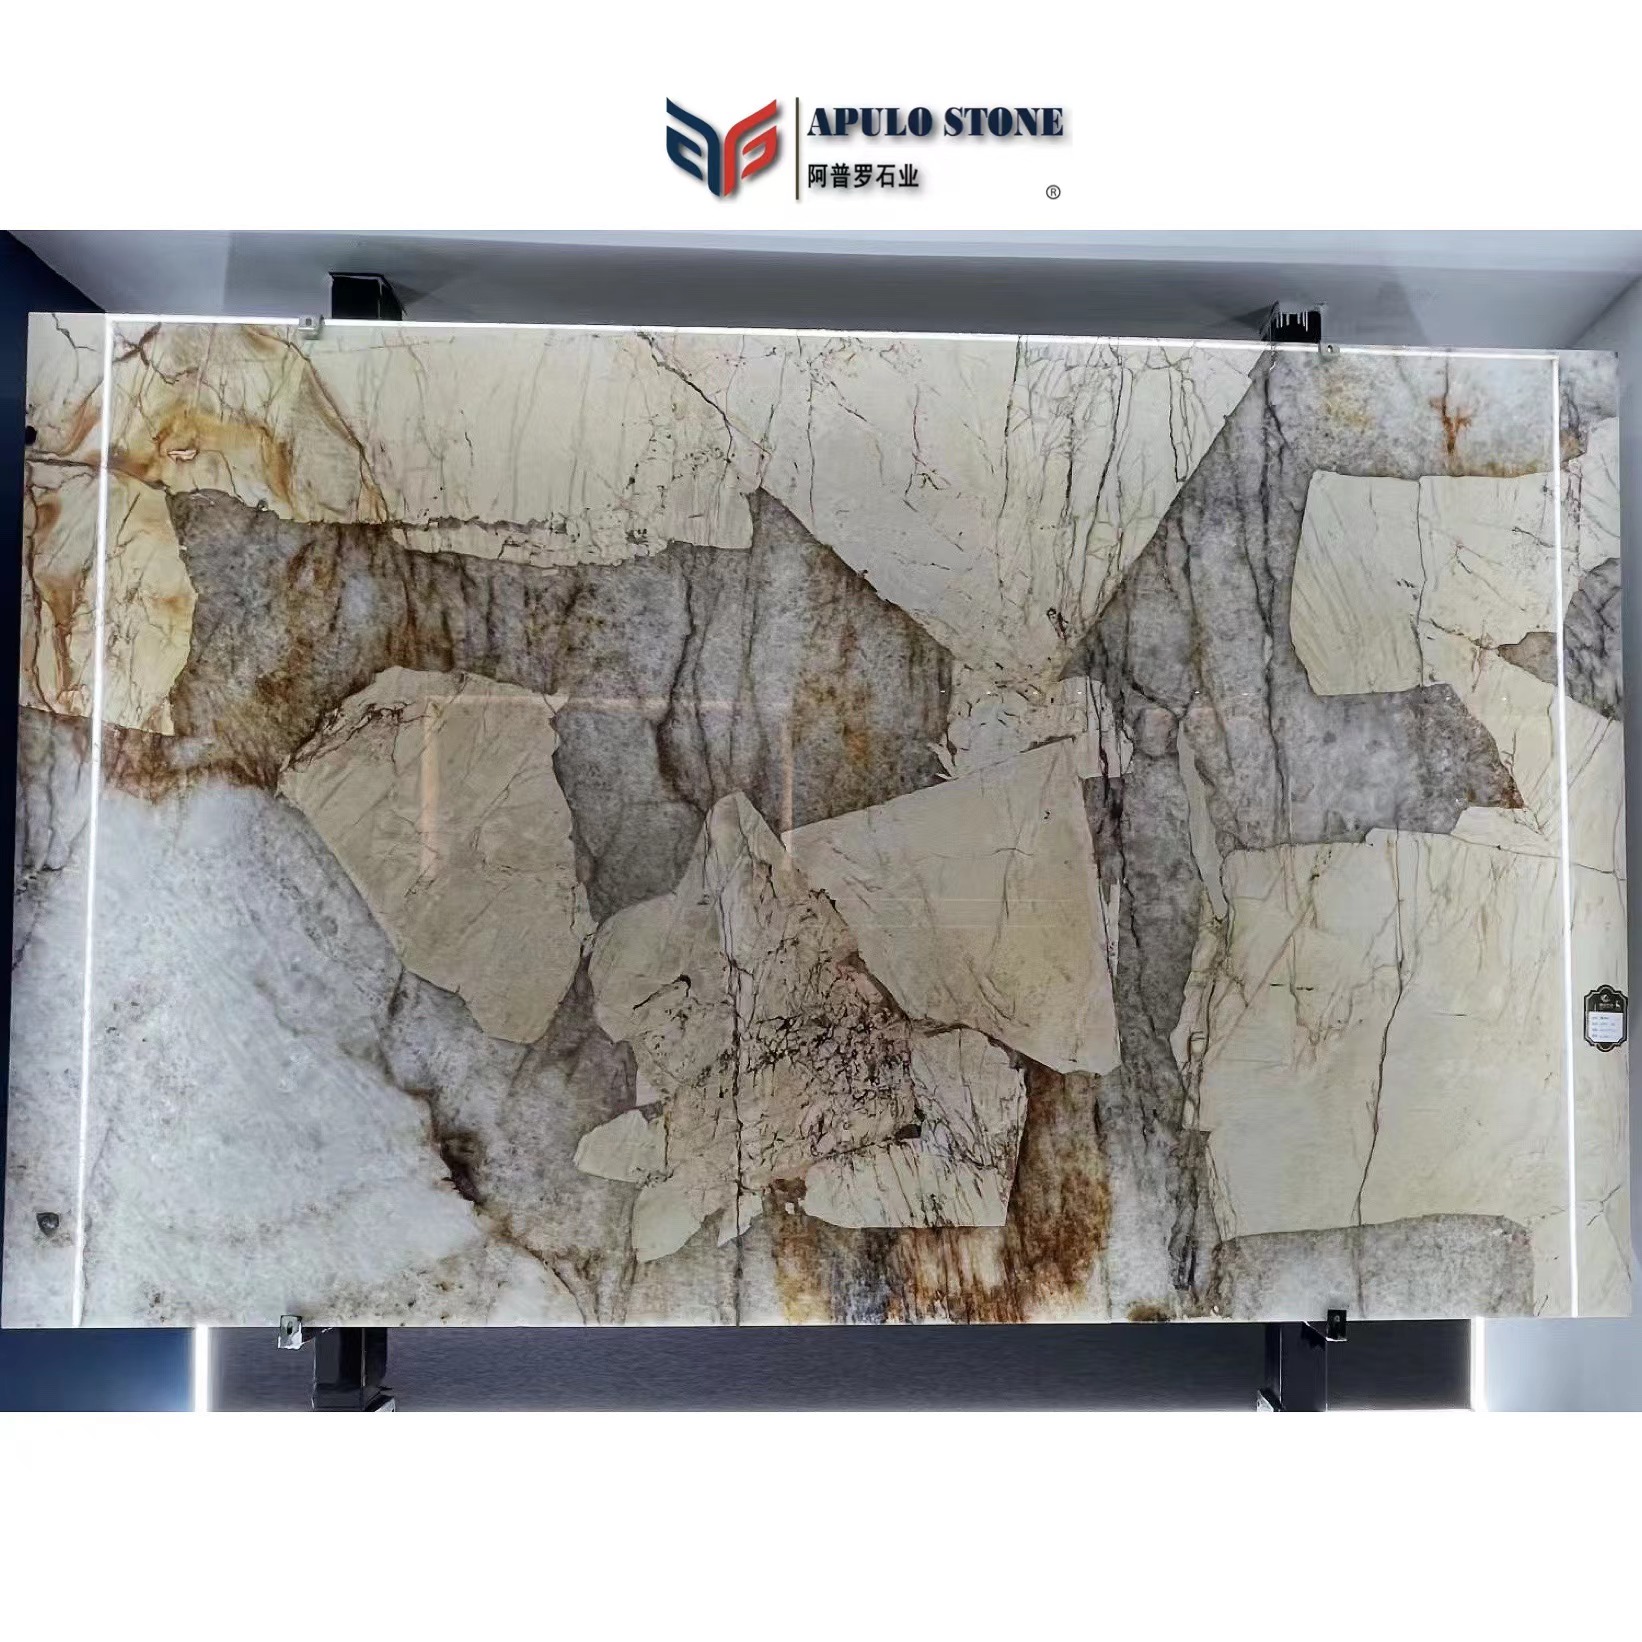 Natural Stone Slab Patagonia Granite Marble Apulo stone for Kitchen Top Background